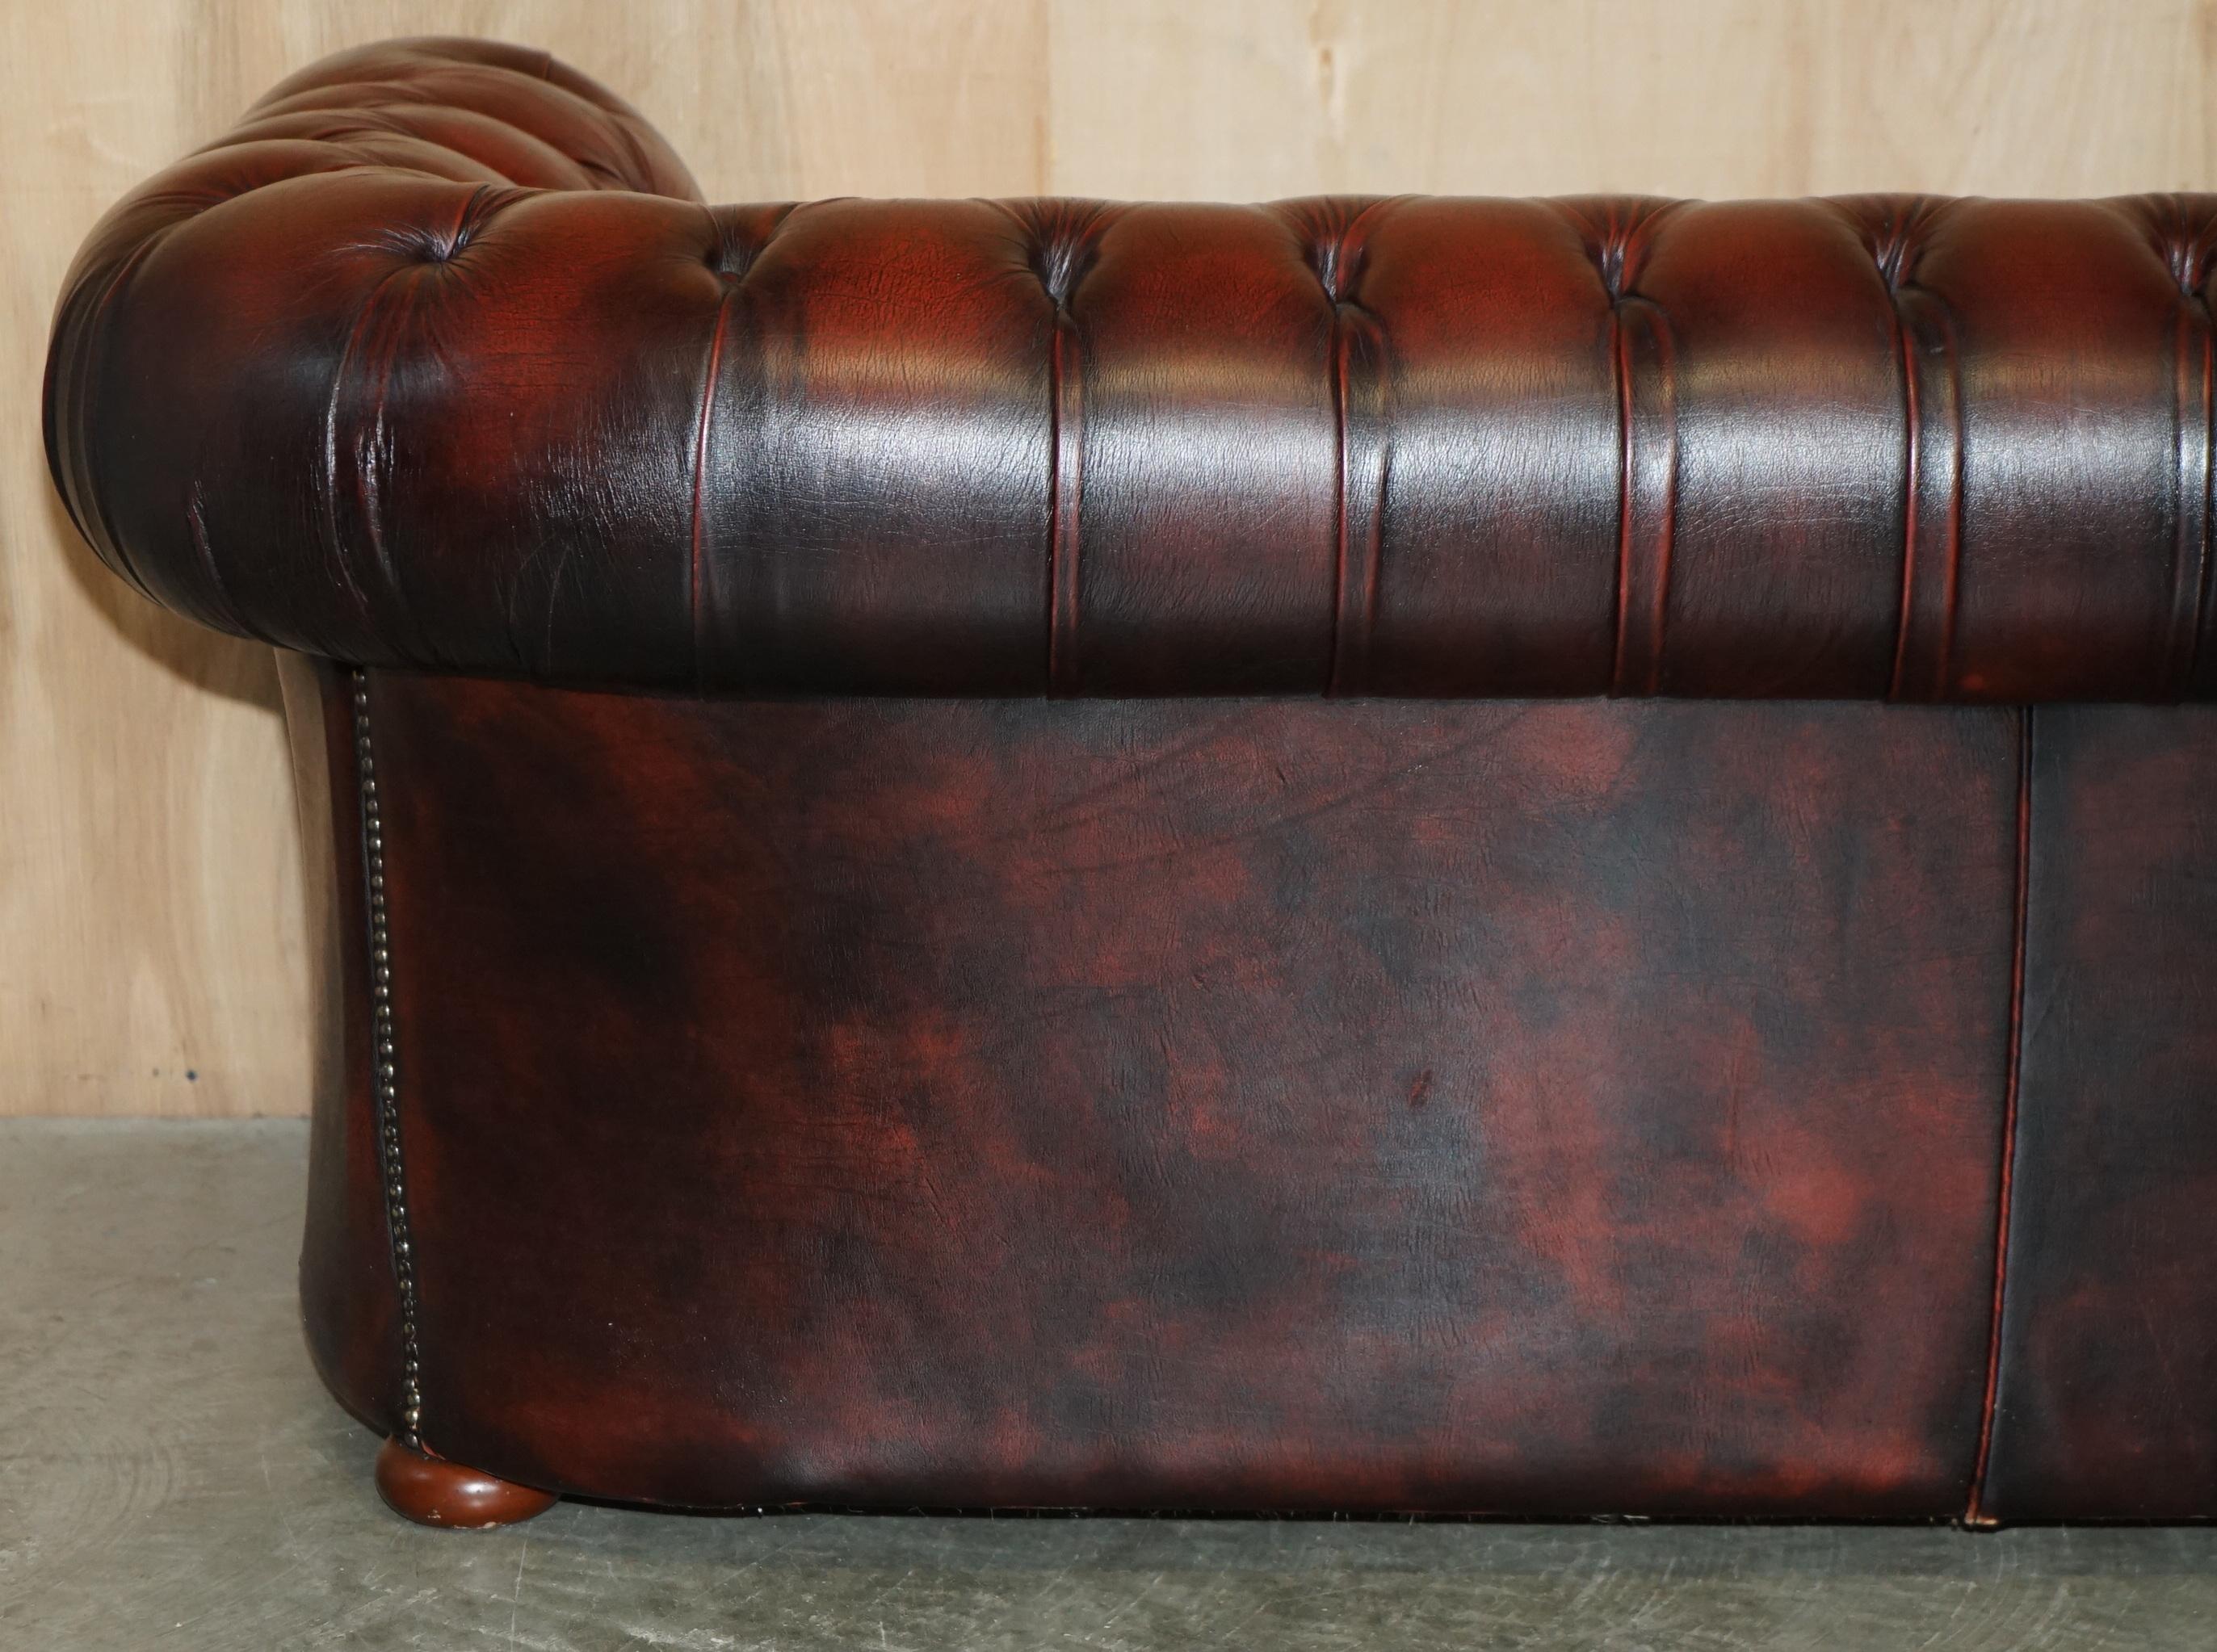 STUNNING FULLY RESTORED ENGLISH ViNTAGE BORDEAUX LEATHER CHESTERFIELD CLUB SOFA For Sale 10